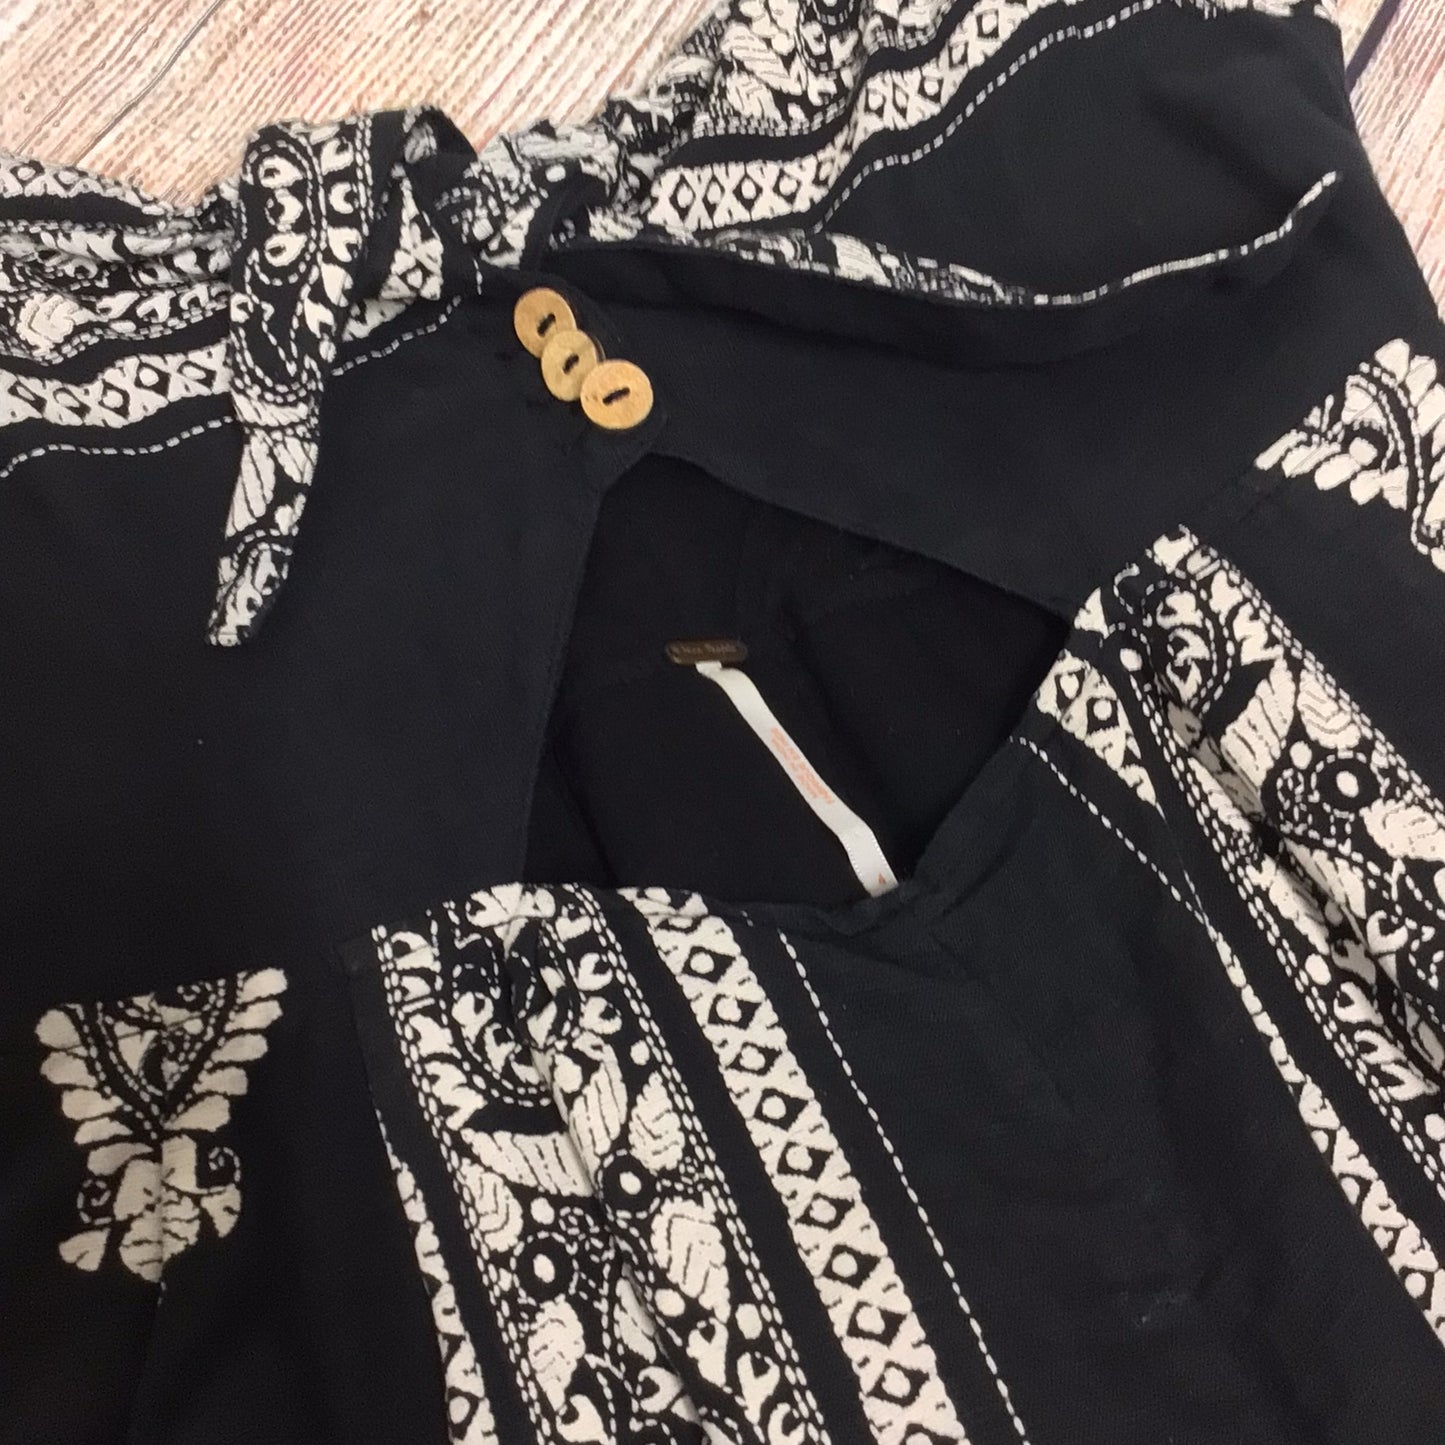 Free People Black & White Paisley Print Strappy Jumpsuit w/Cutout & Pockets Size 4 on label